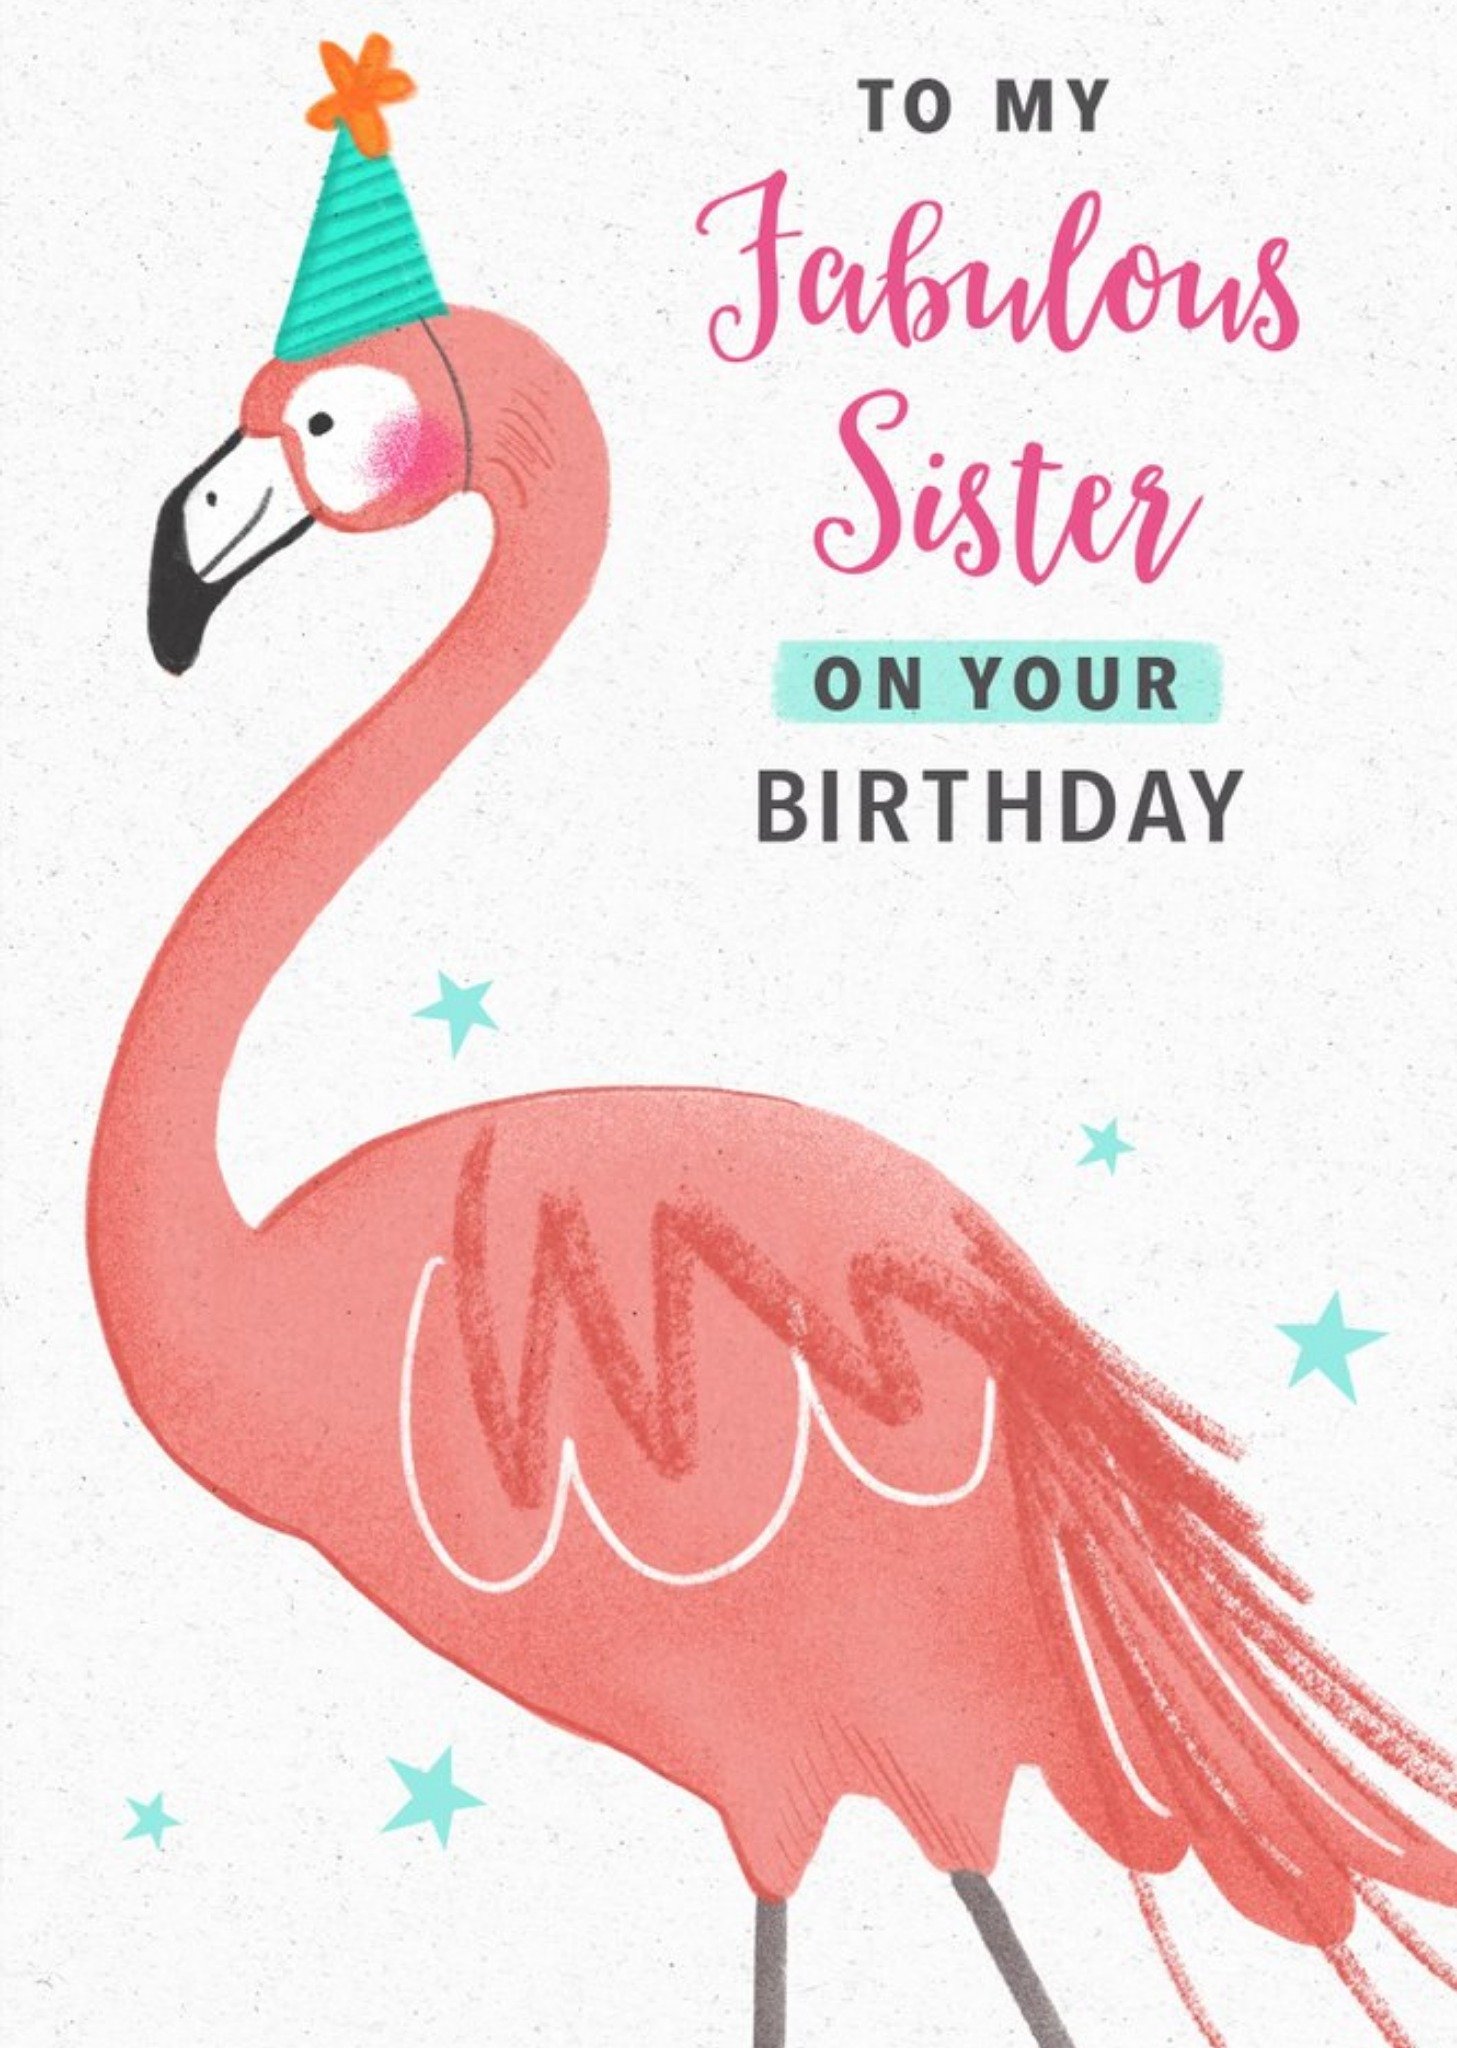 Moonpig Flamingo Celebrating A Birthday With A Party Hat To My Fabulous Sister Card Ecard